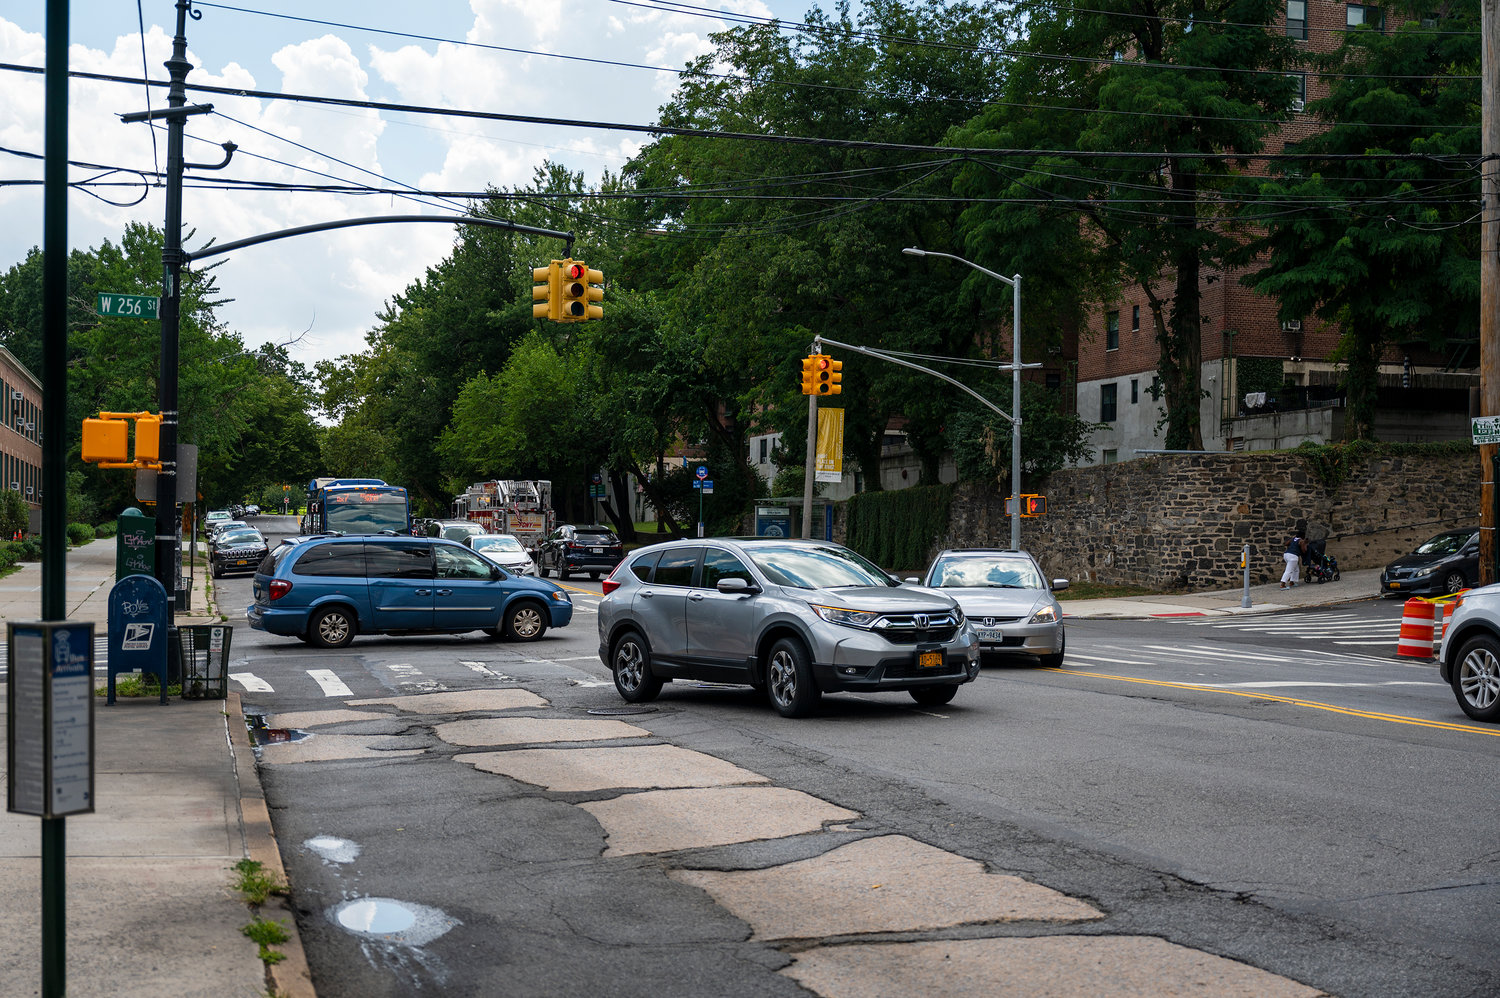 Stretching from West 254th to West 263rd streets is the intersection where the city’s transportation department says is burdened with a high number of traffic accidents and collisions. Their prediction is that by narrowing the road, those numbers will decrease. However, some in the community beg to differ.